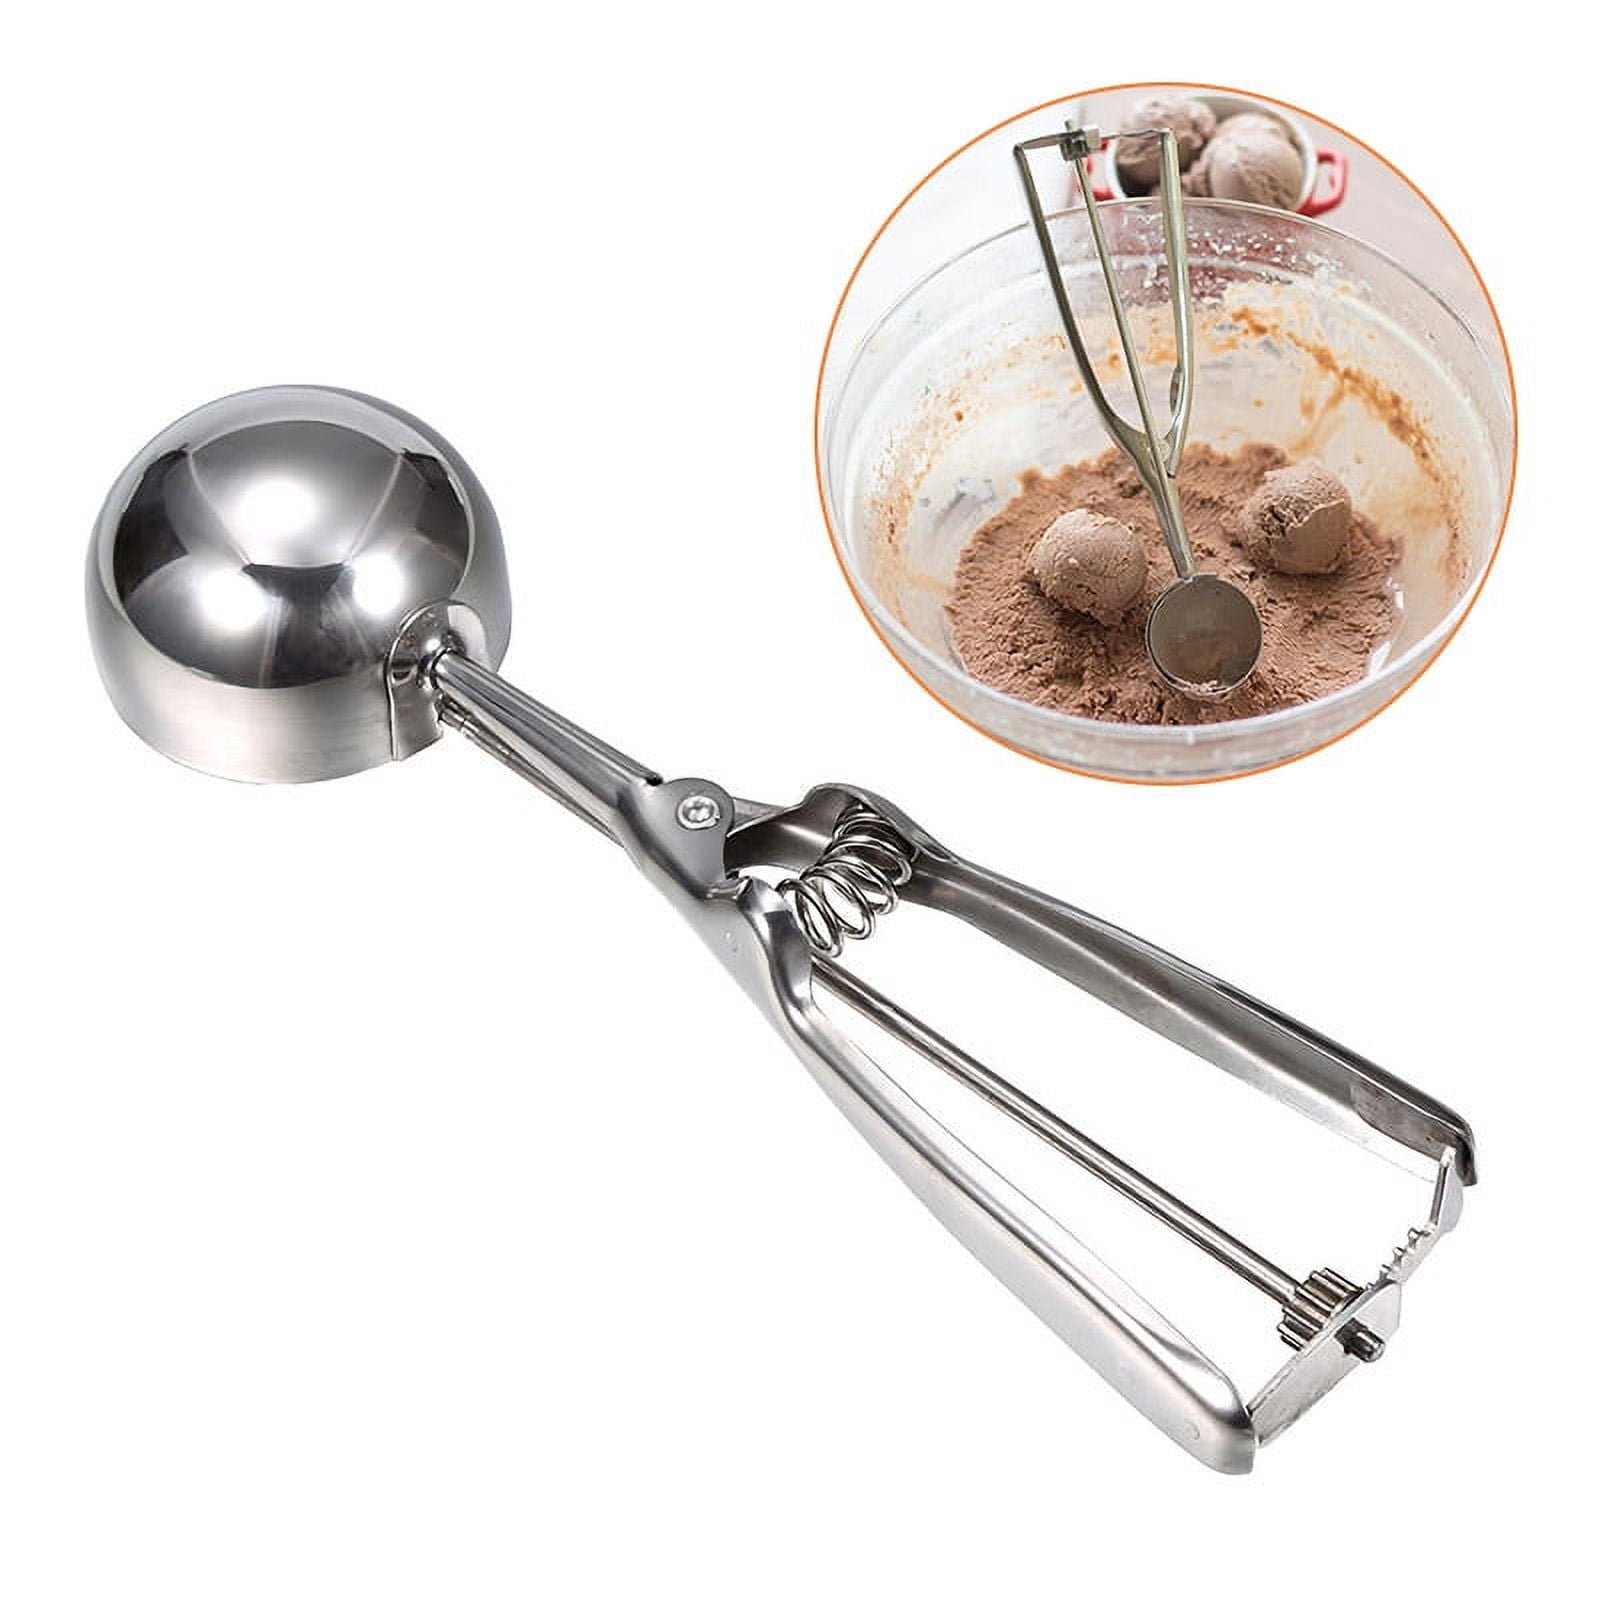 Ice Cream Scoop, Melon Spoon, Stainless Steel Spoon For Baking, Ice Cream  Digger Spoon With Trigger, Modern Dough Scoop, Reusable Melon Spoon,  Washable Dessert Spoon For Party Wedding For Restaurant Home, Kitchen